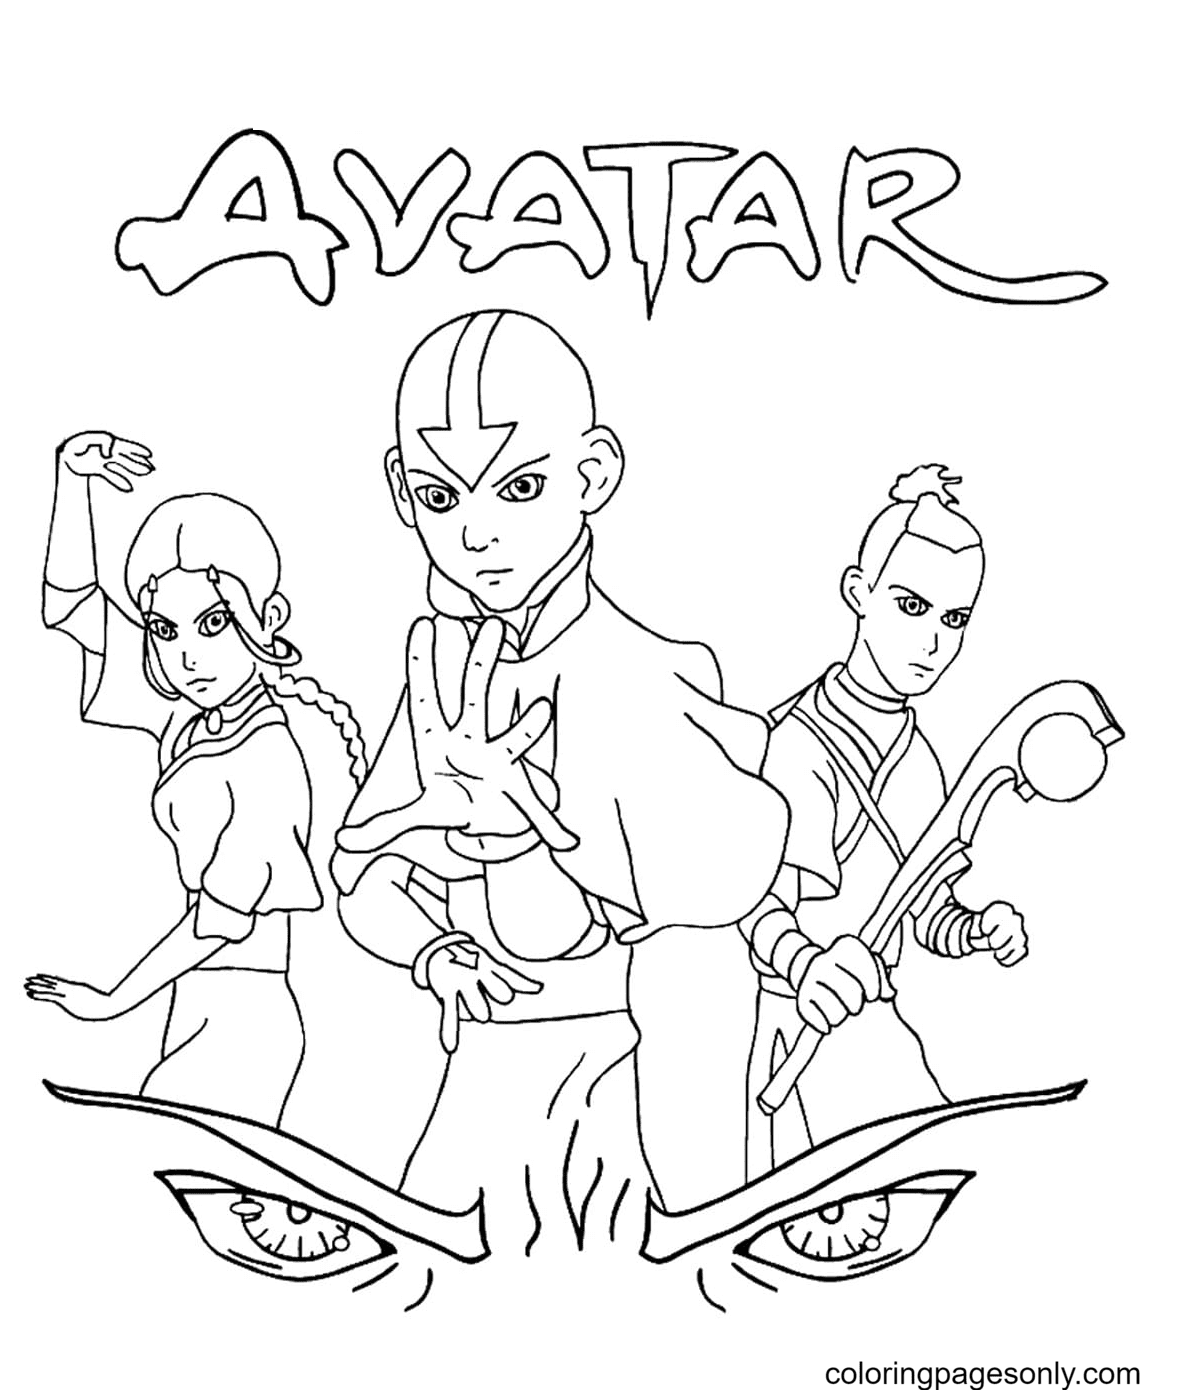 Aang and his friends from Avatar